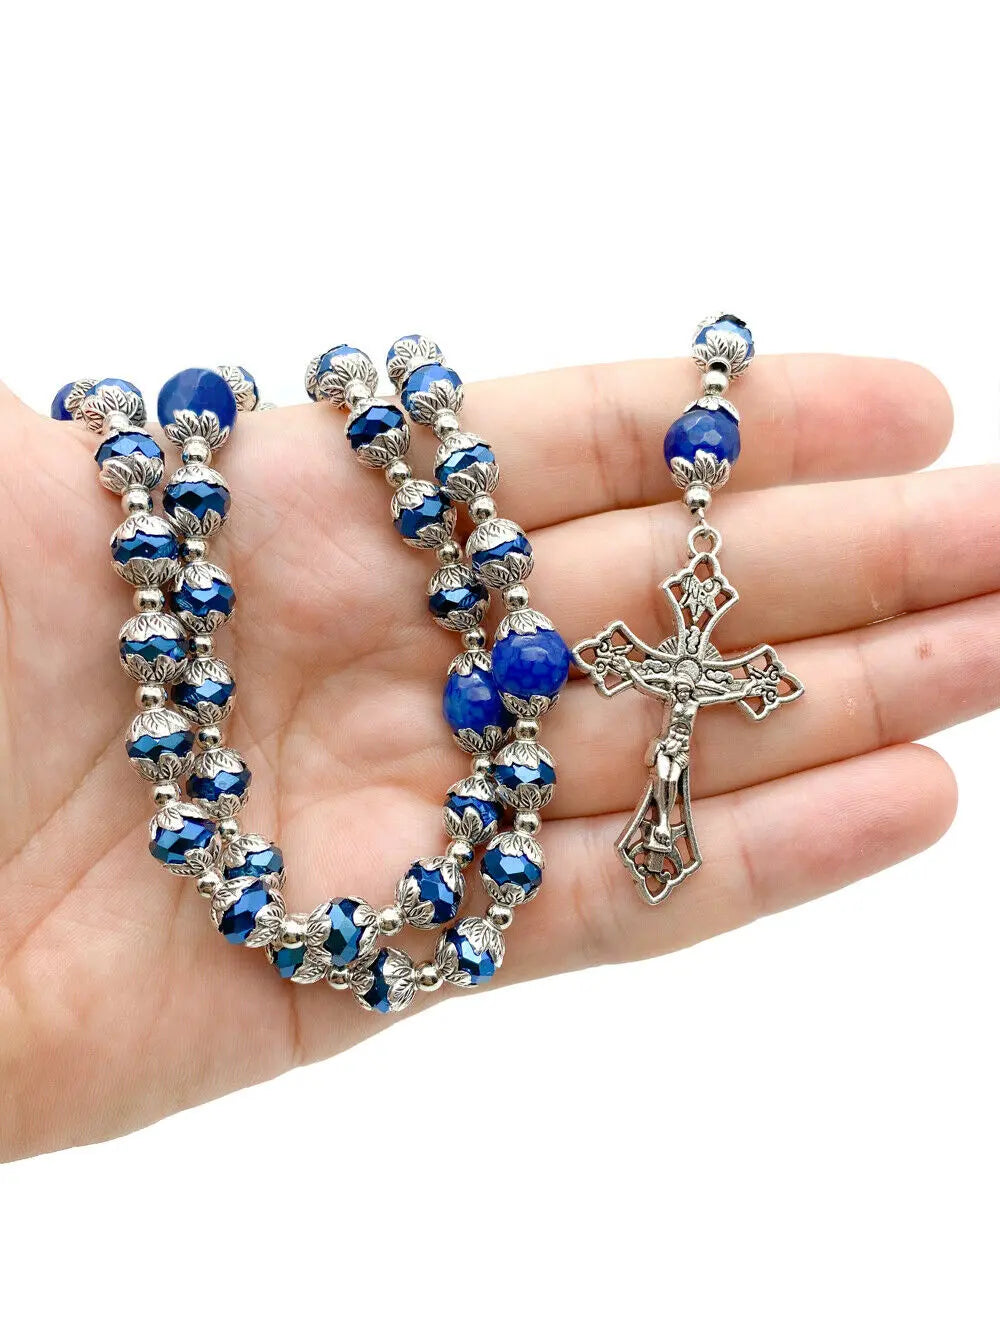 Deep Blue Crystal Beads Rosary Blue Agate Glory Stone Necklace Miraculous Medal & Cross 